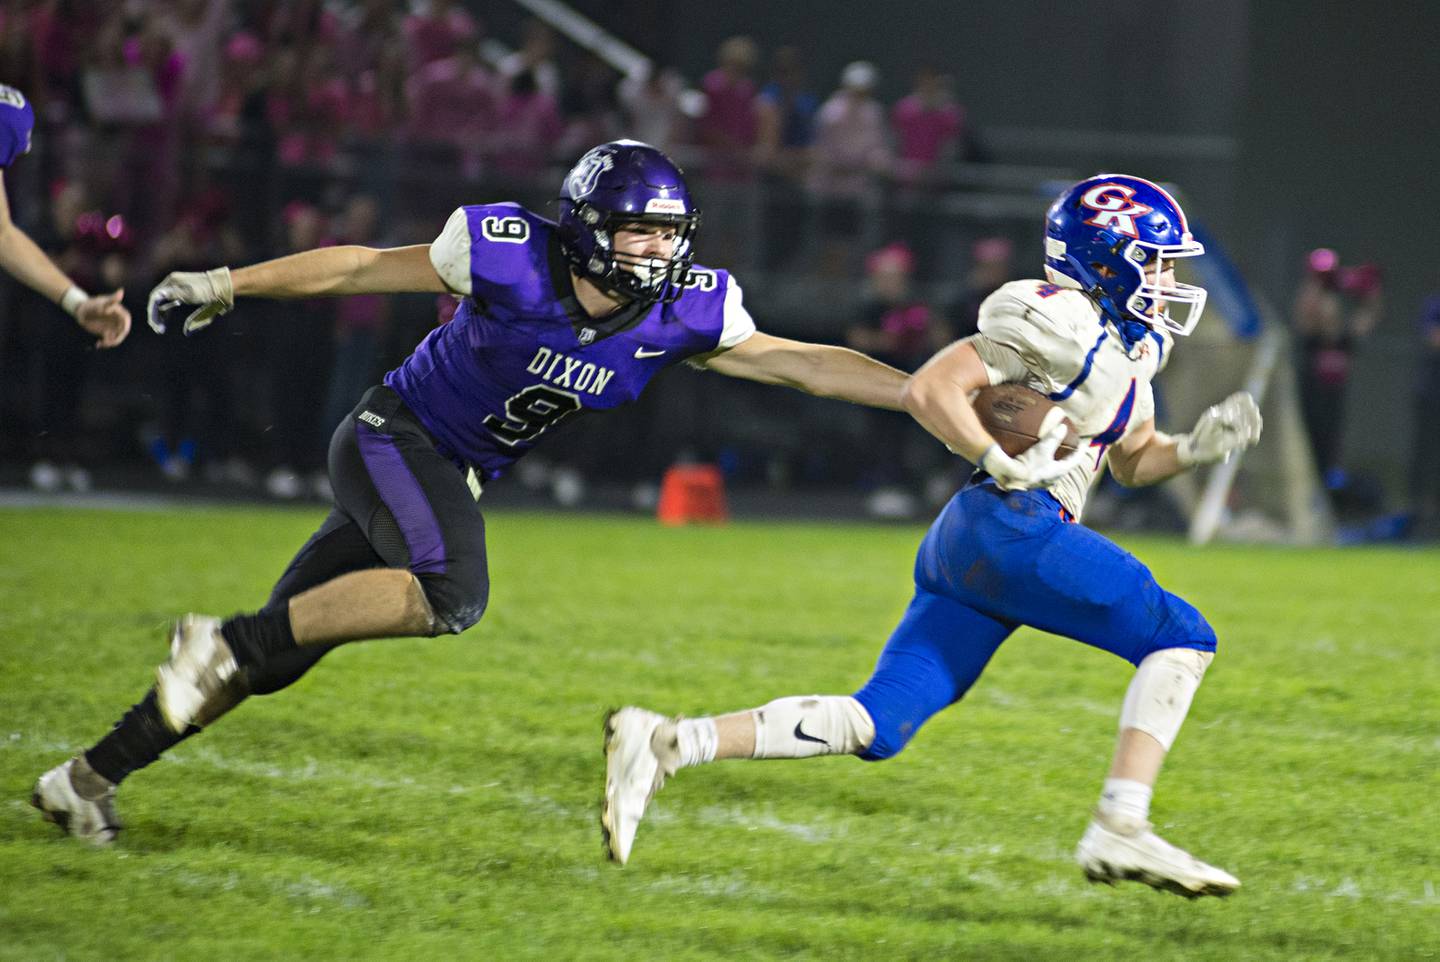 Genoa-Kingston's Ethan stays out of the reach of Dixon's Peyton Hale Friday, Oct. 8, 2021.